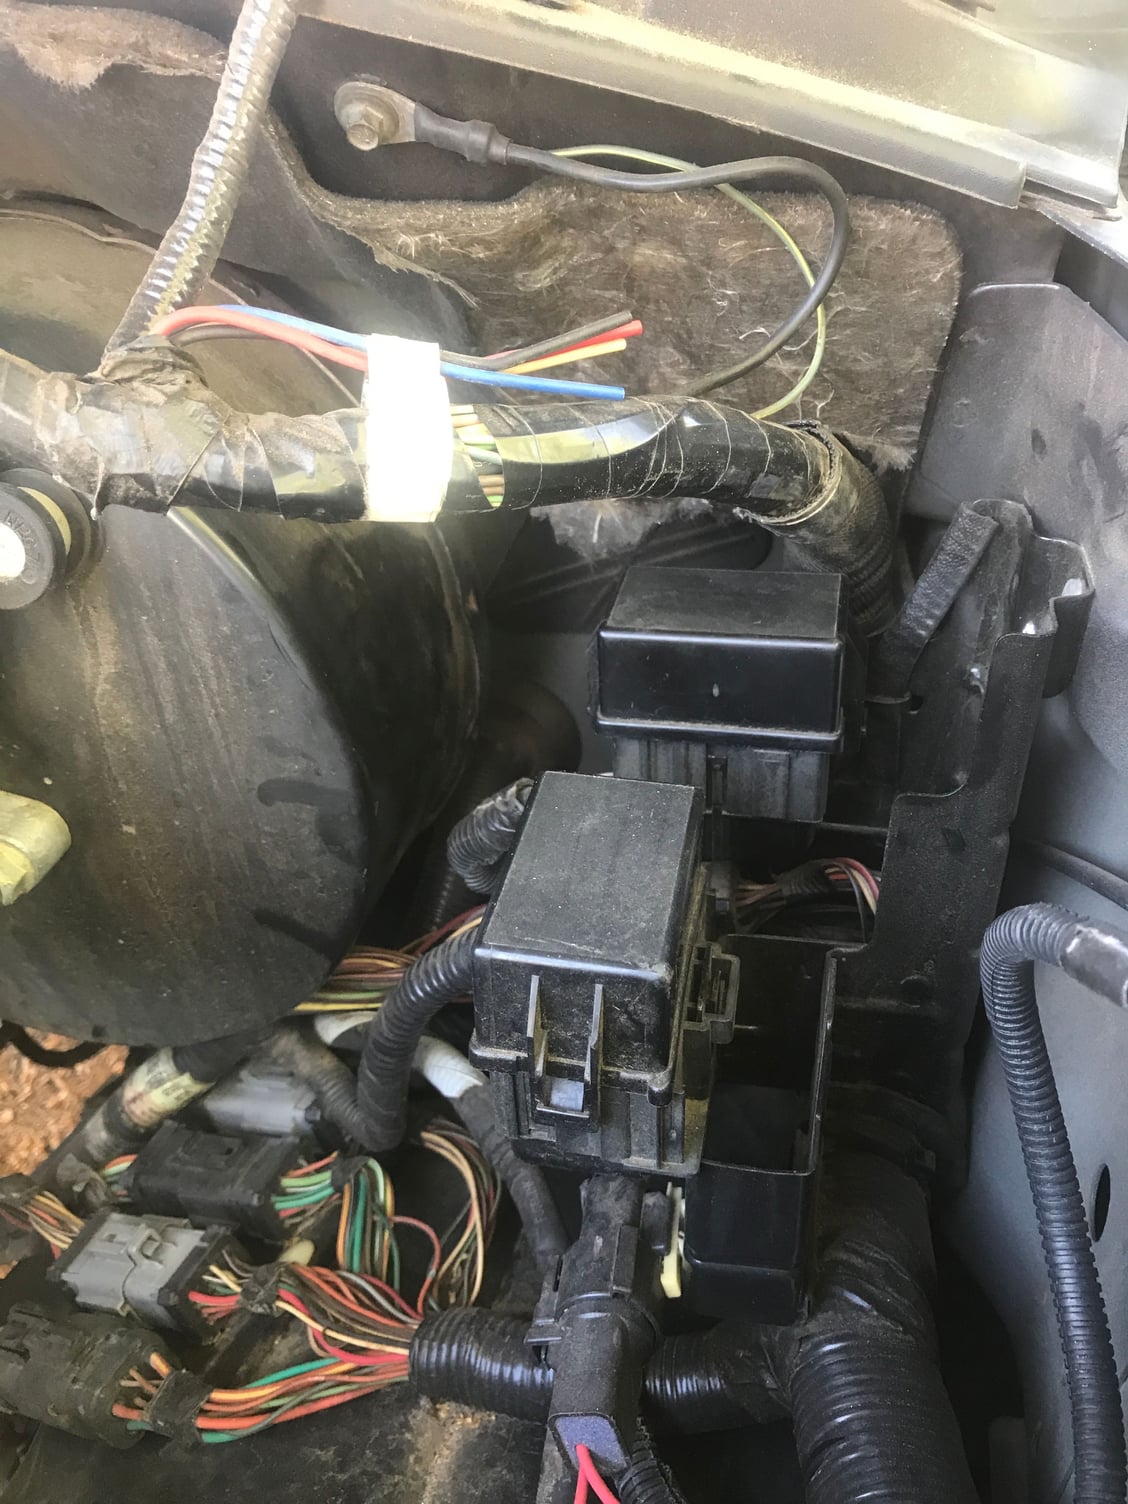 Left trailer running light stays on - Ford Truck Enthusiasts Forums 2013 F150 Trailer Lights Not Working